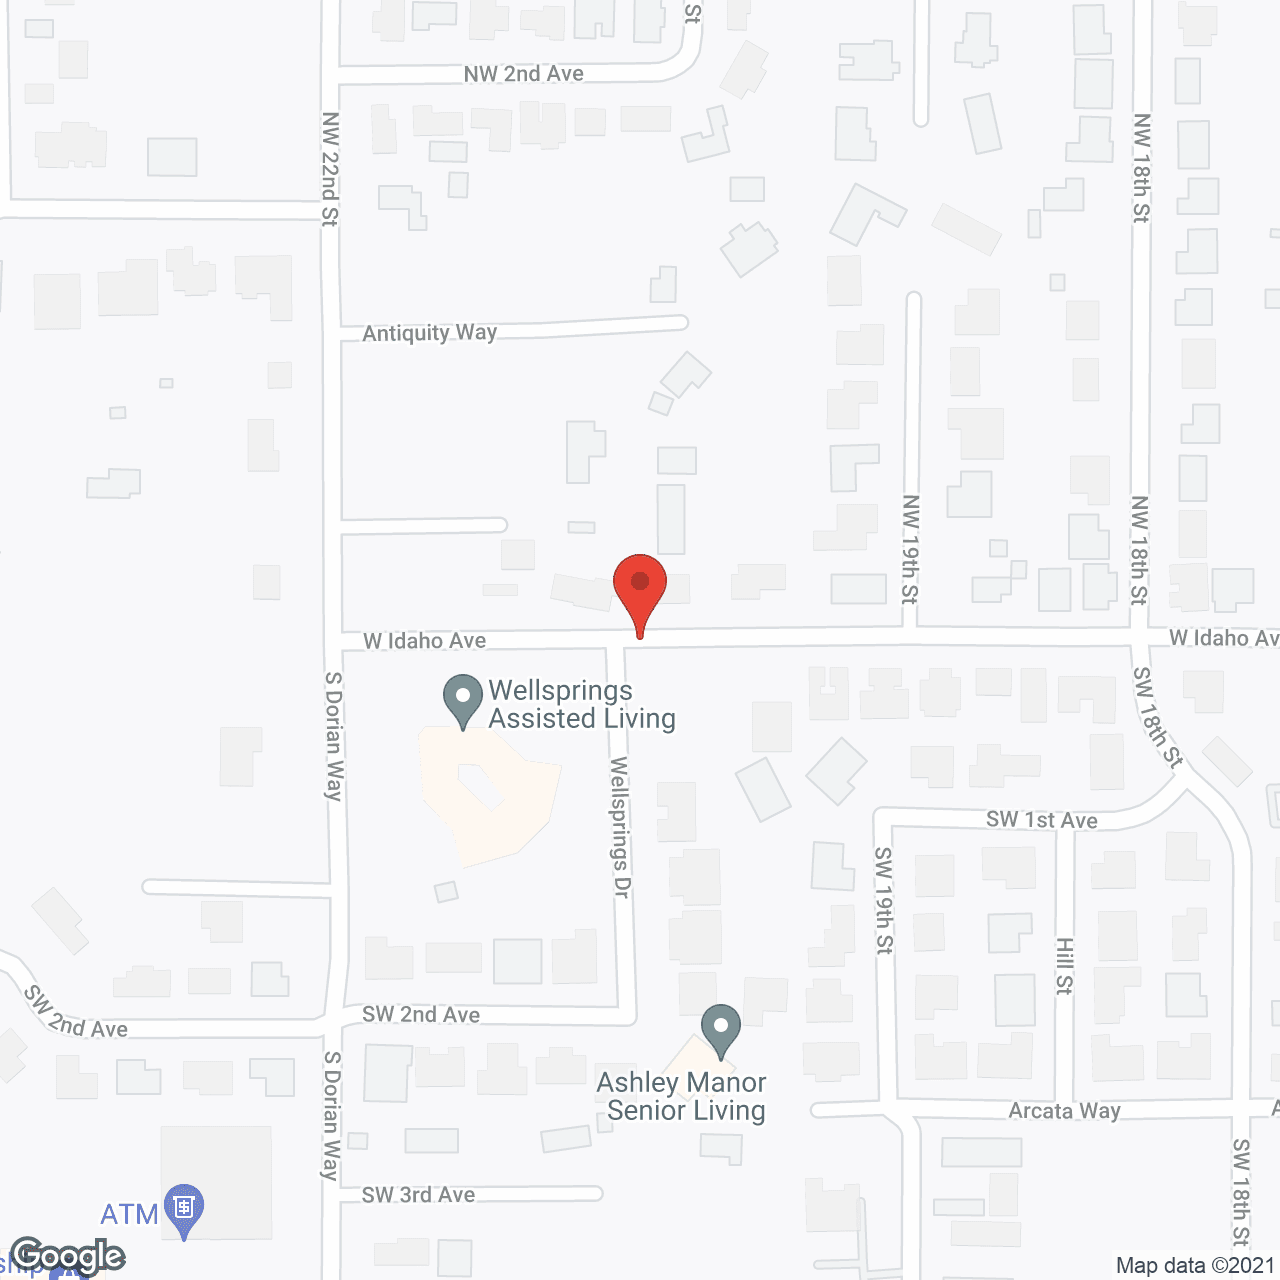 Wellsprings Assisted Living in google map